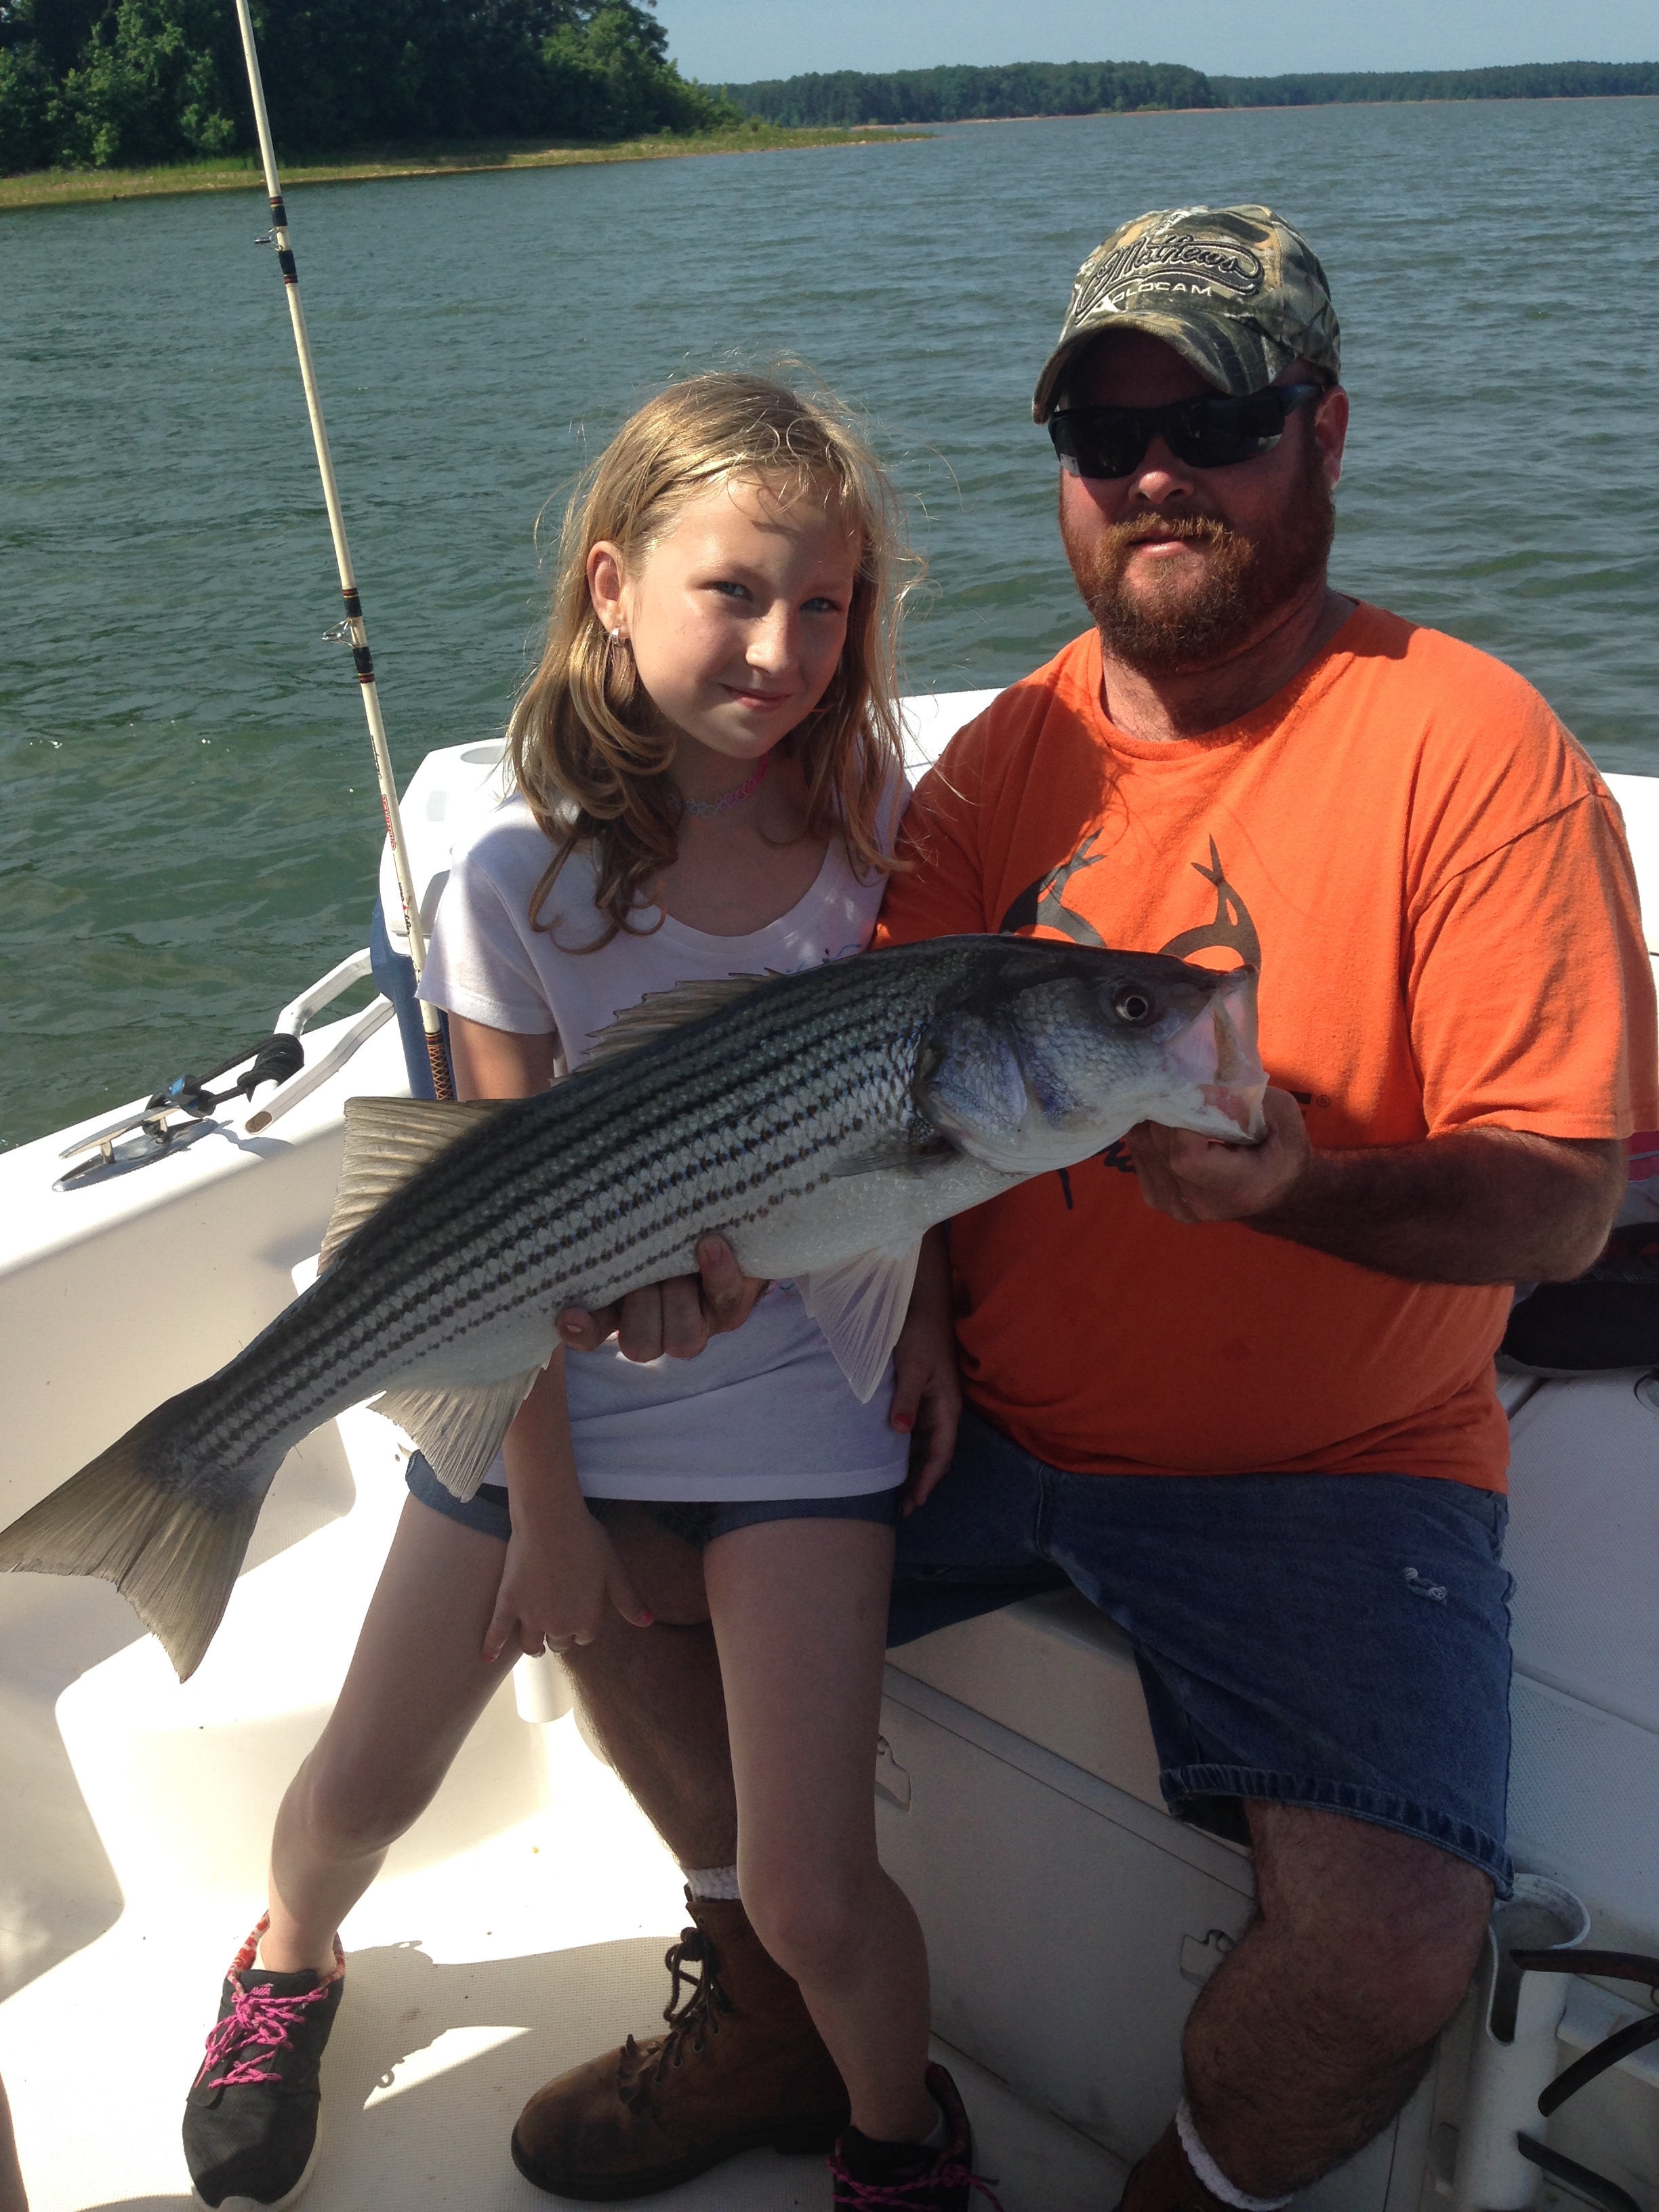 May 29,2017 Tiffant Barrow with her 15 pound striper Brad helping hold the striper.